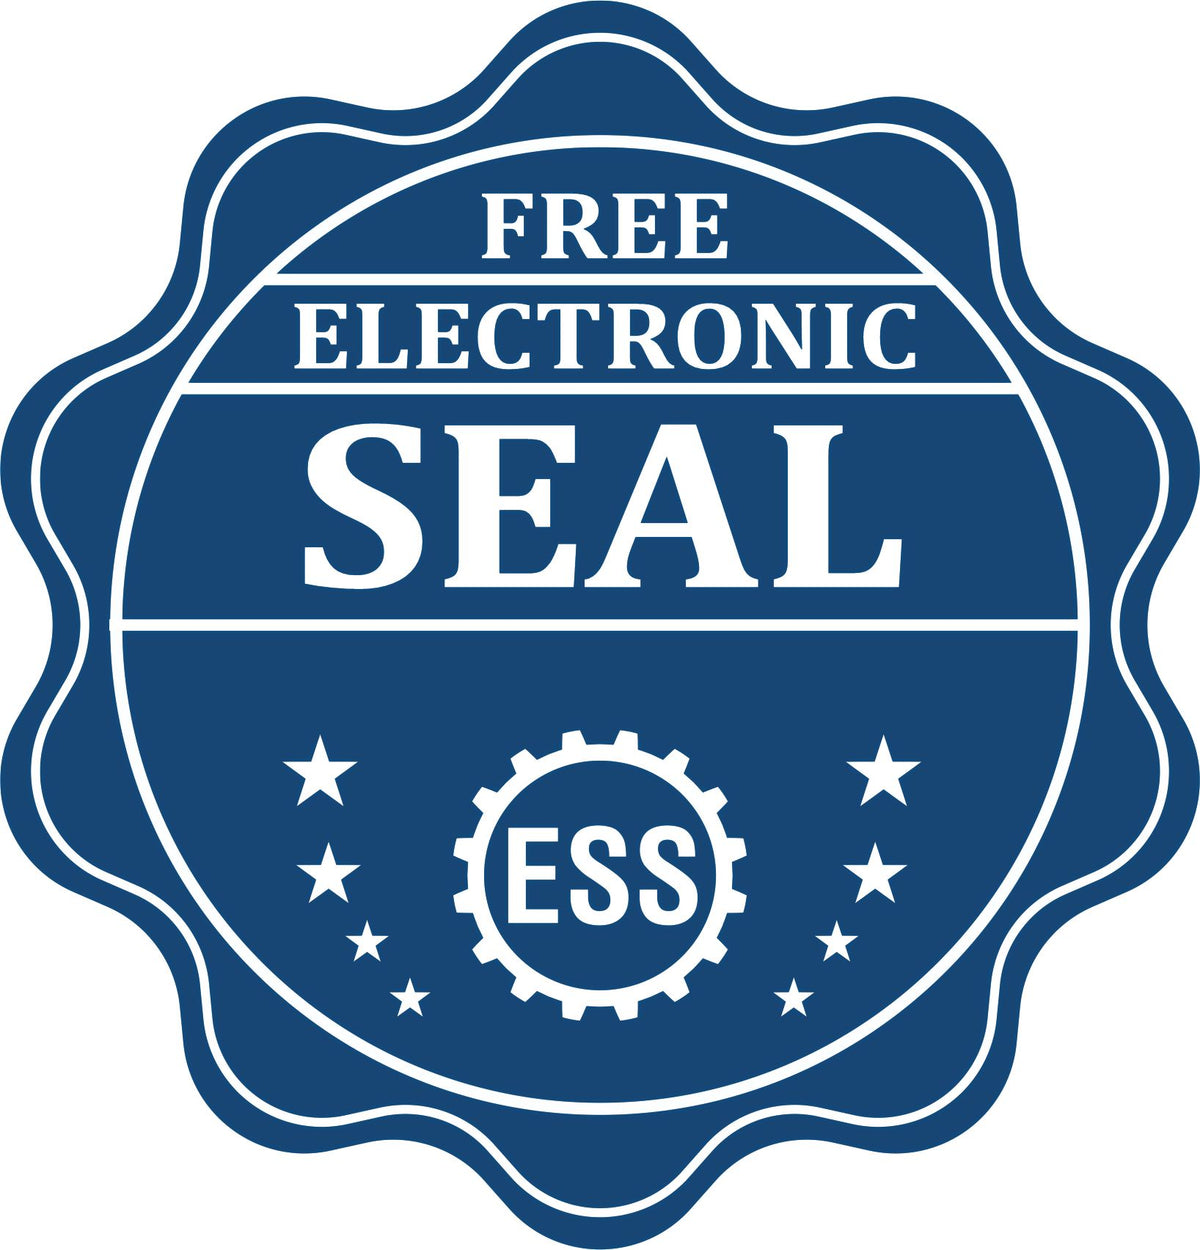 A badge showing a free electronic seal for the State of Connecticut Extended Long Reach Engineer Seal with stars and the ESS gear on the emblem.